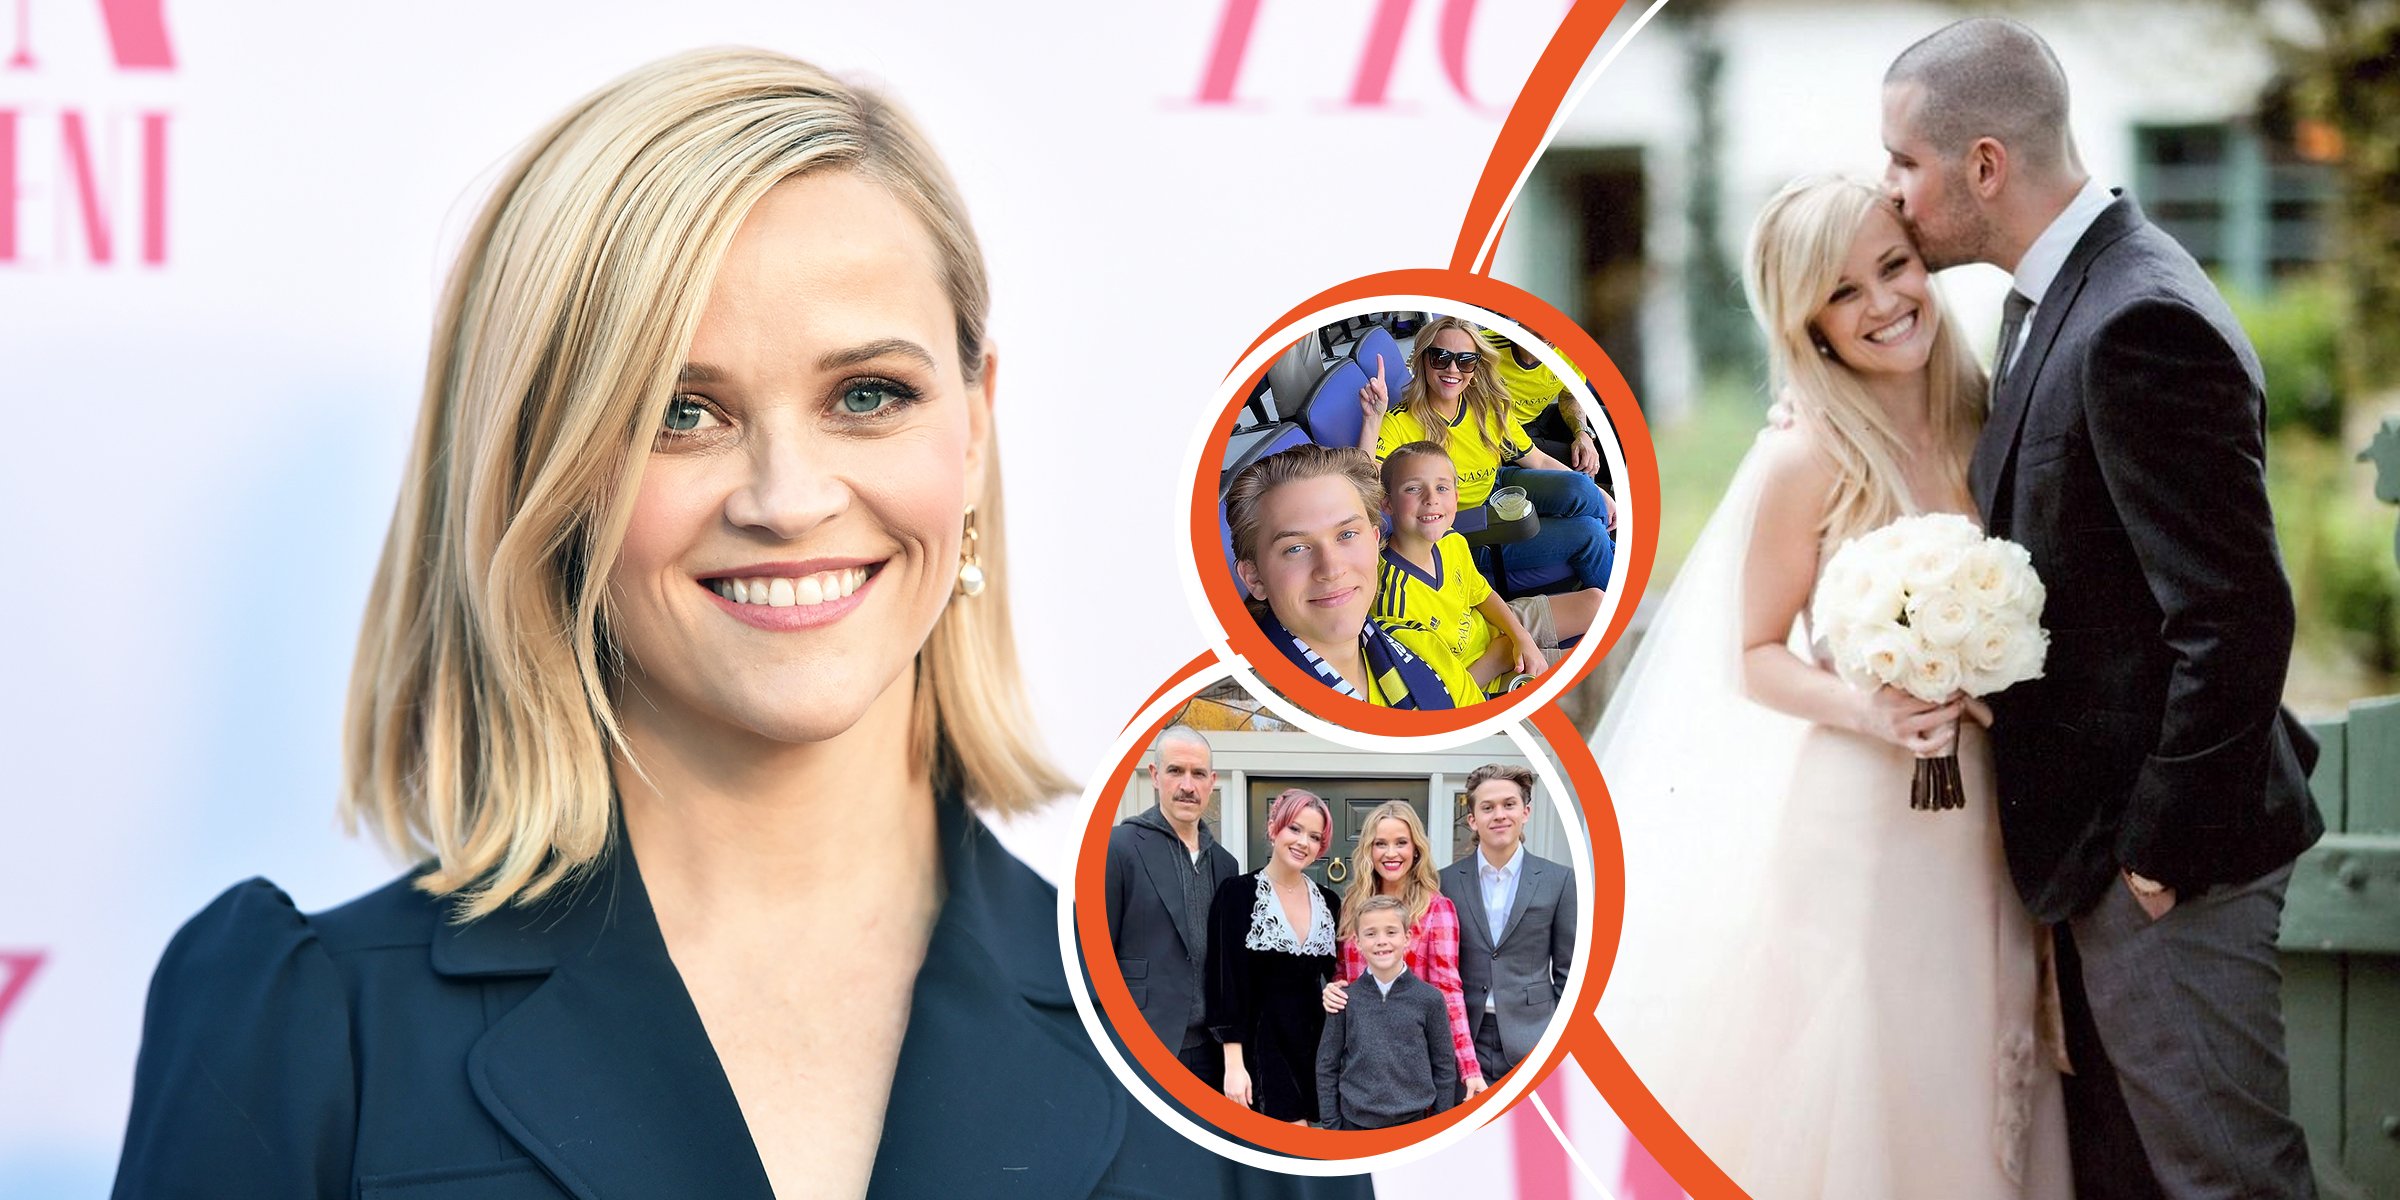 Reese Witherspoon | Reese Witherspoon, Jim Toth, Ava, Tennessee and Deacon | James Toth, Reese Witherspoon, Deacon and Tennessee | James Toth and Reese Witherspoon | Source: Getty Images | instagram.com/reesewitherspoon